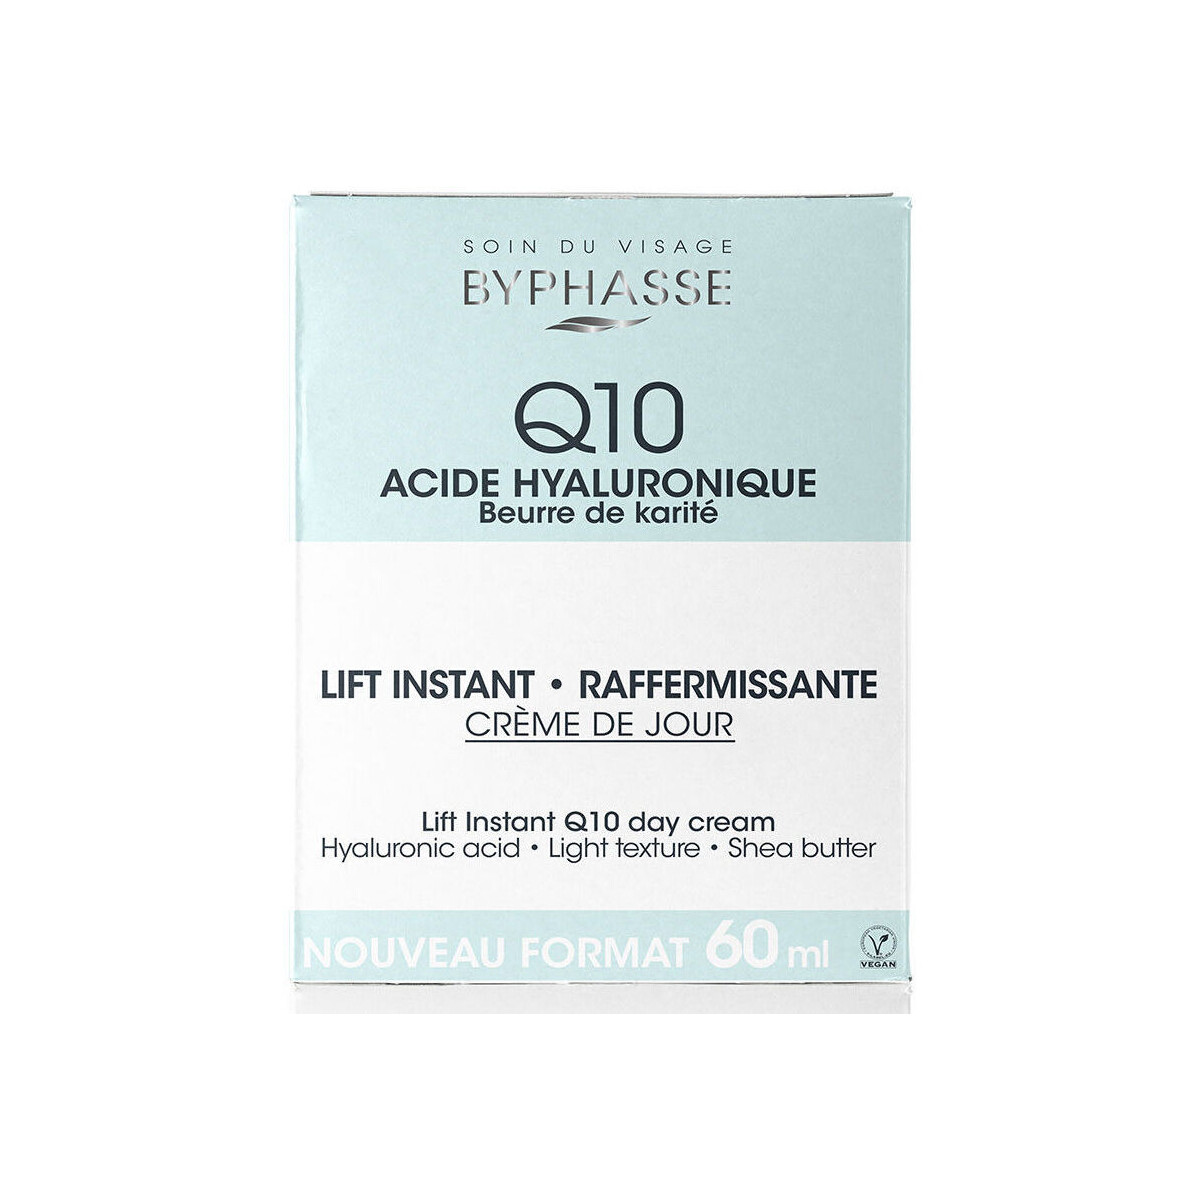 Beauty gezielte Gesichtspflege Byphasse Lift Instant Q10 Tagescreme 